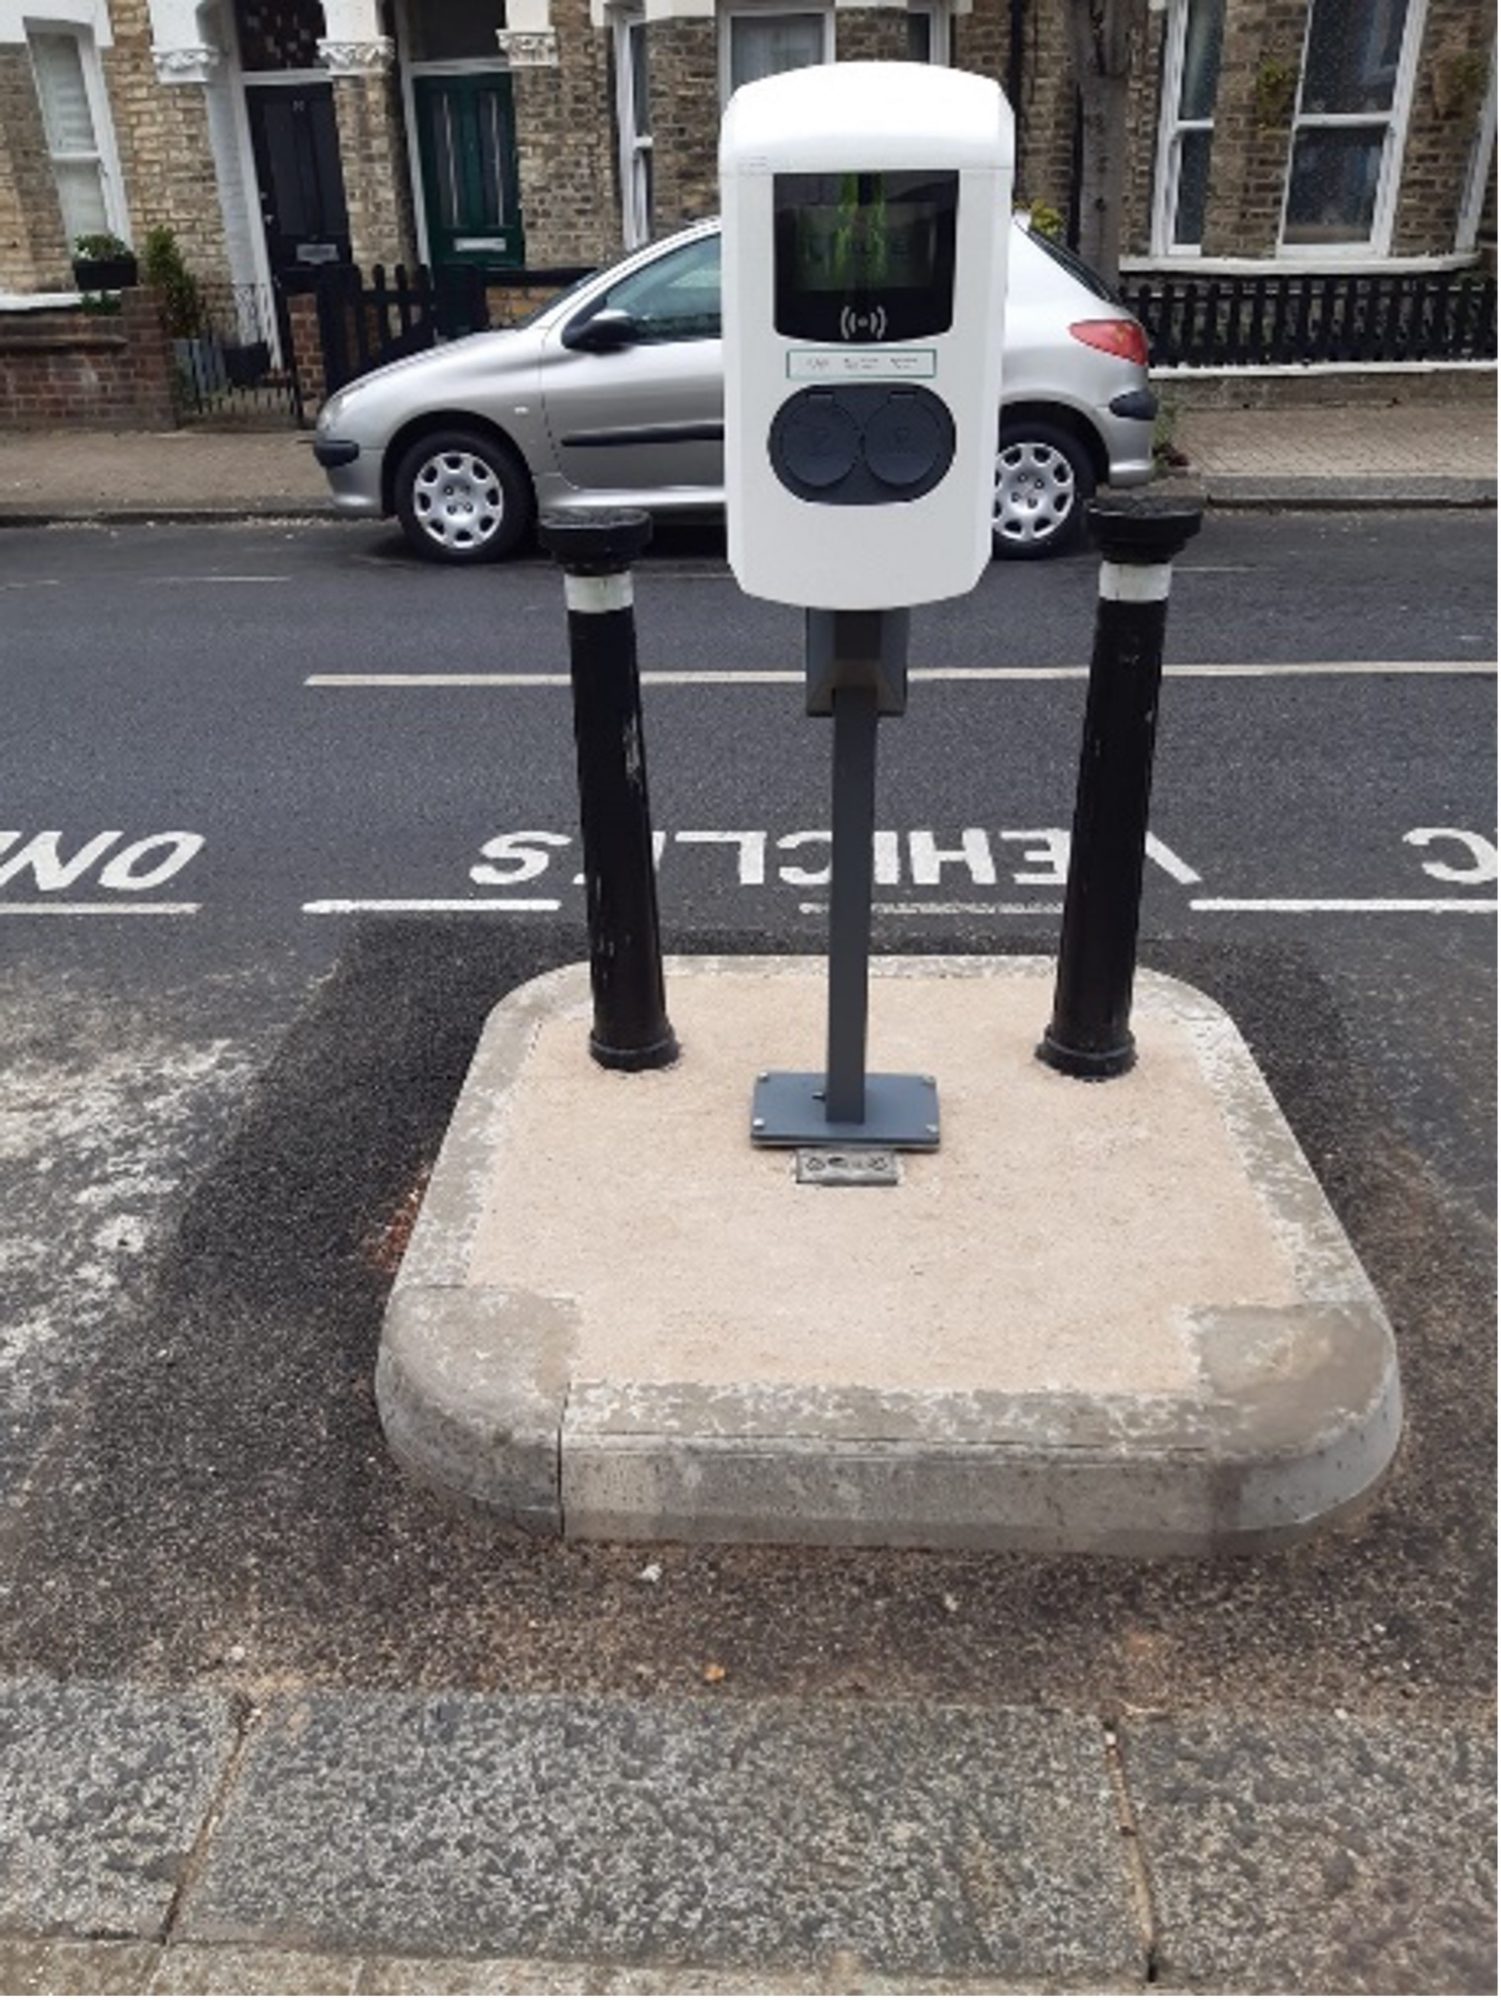 EVCP charging point on street